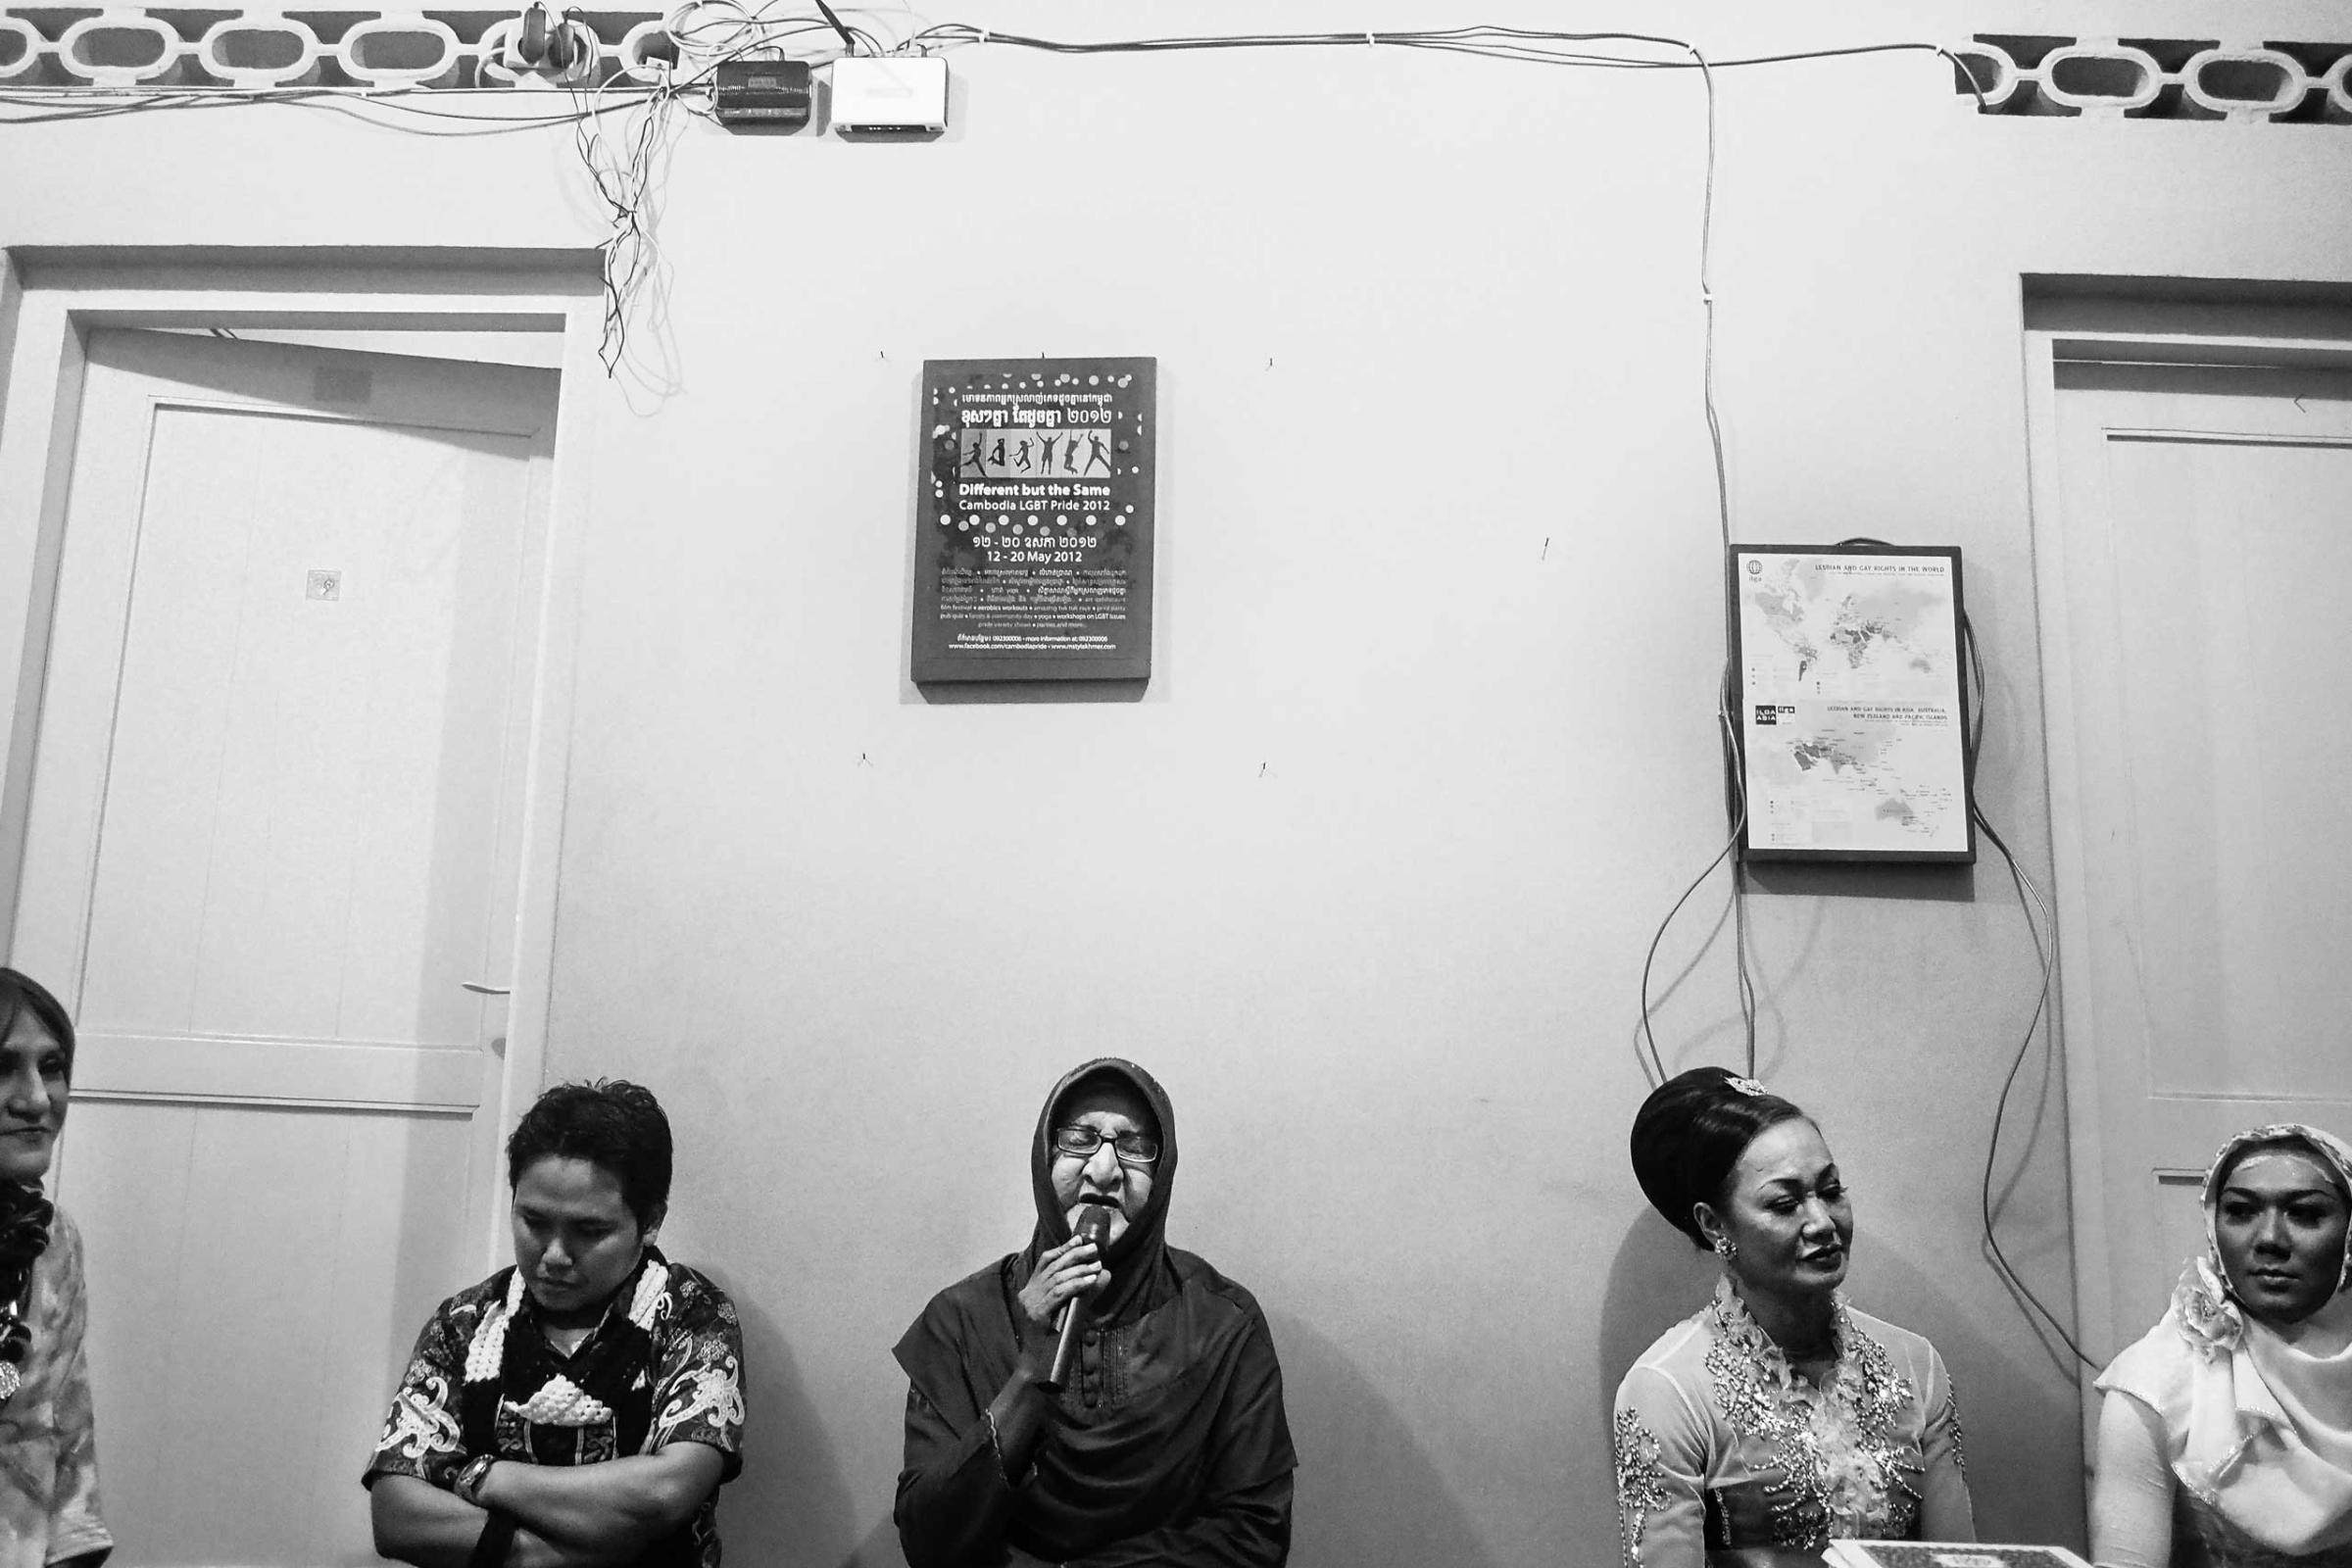 Shinta Ratri talks about sexuality and religion during a local annual meeting of LGBT and waria community in Yogyakarta.